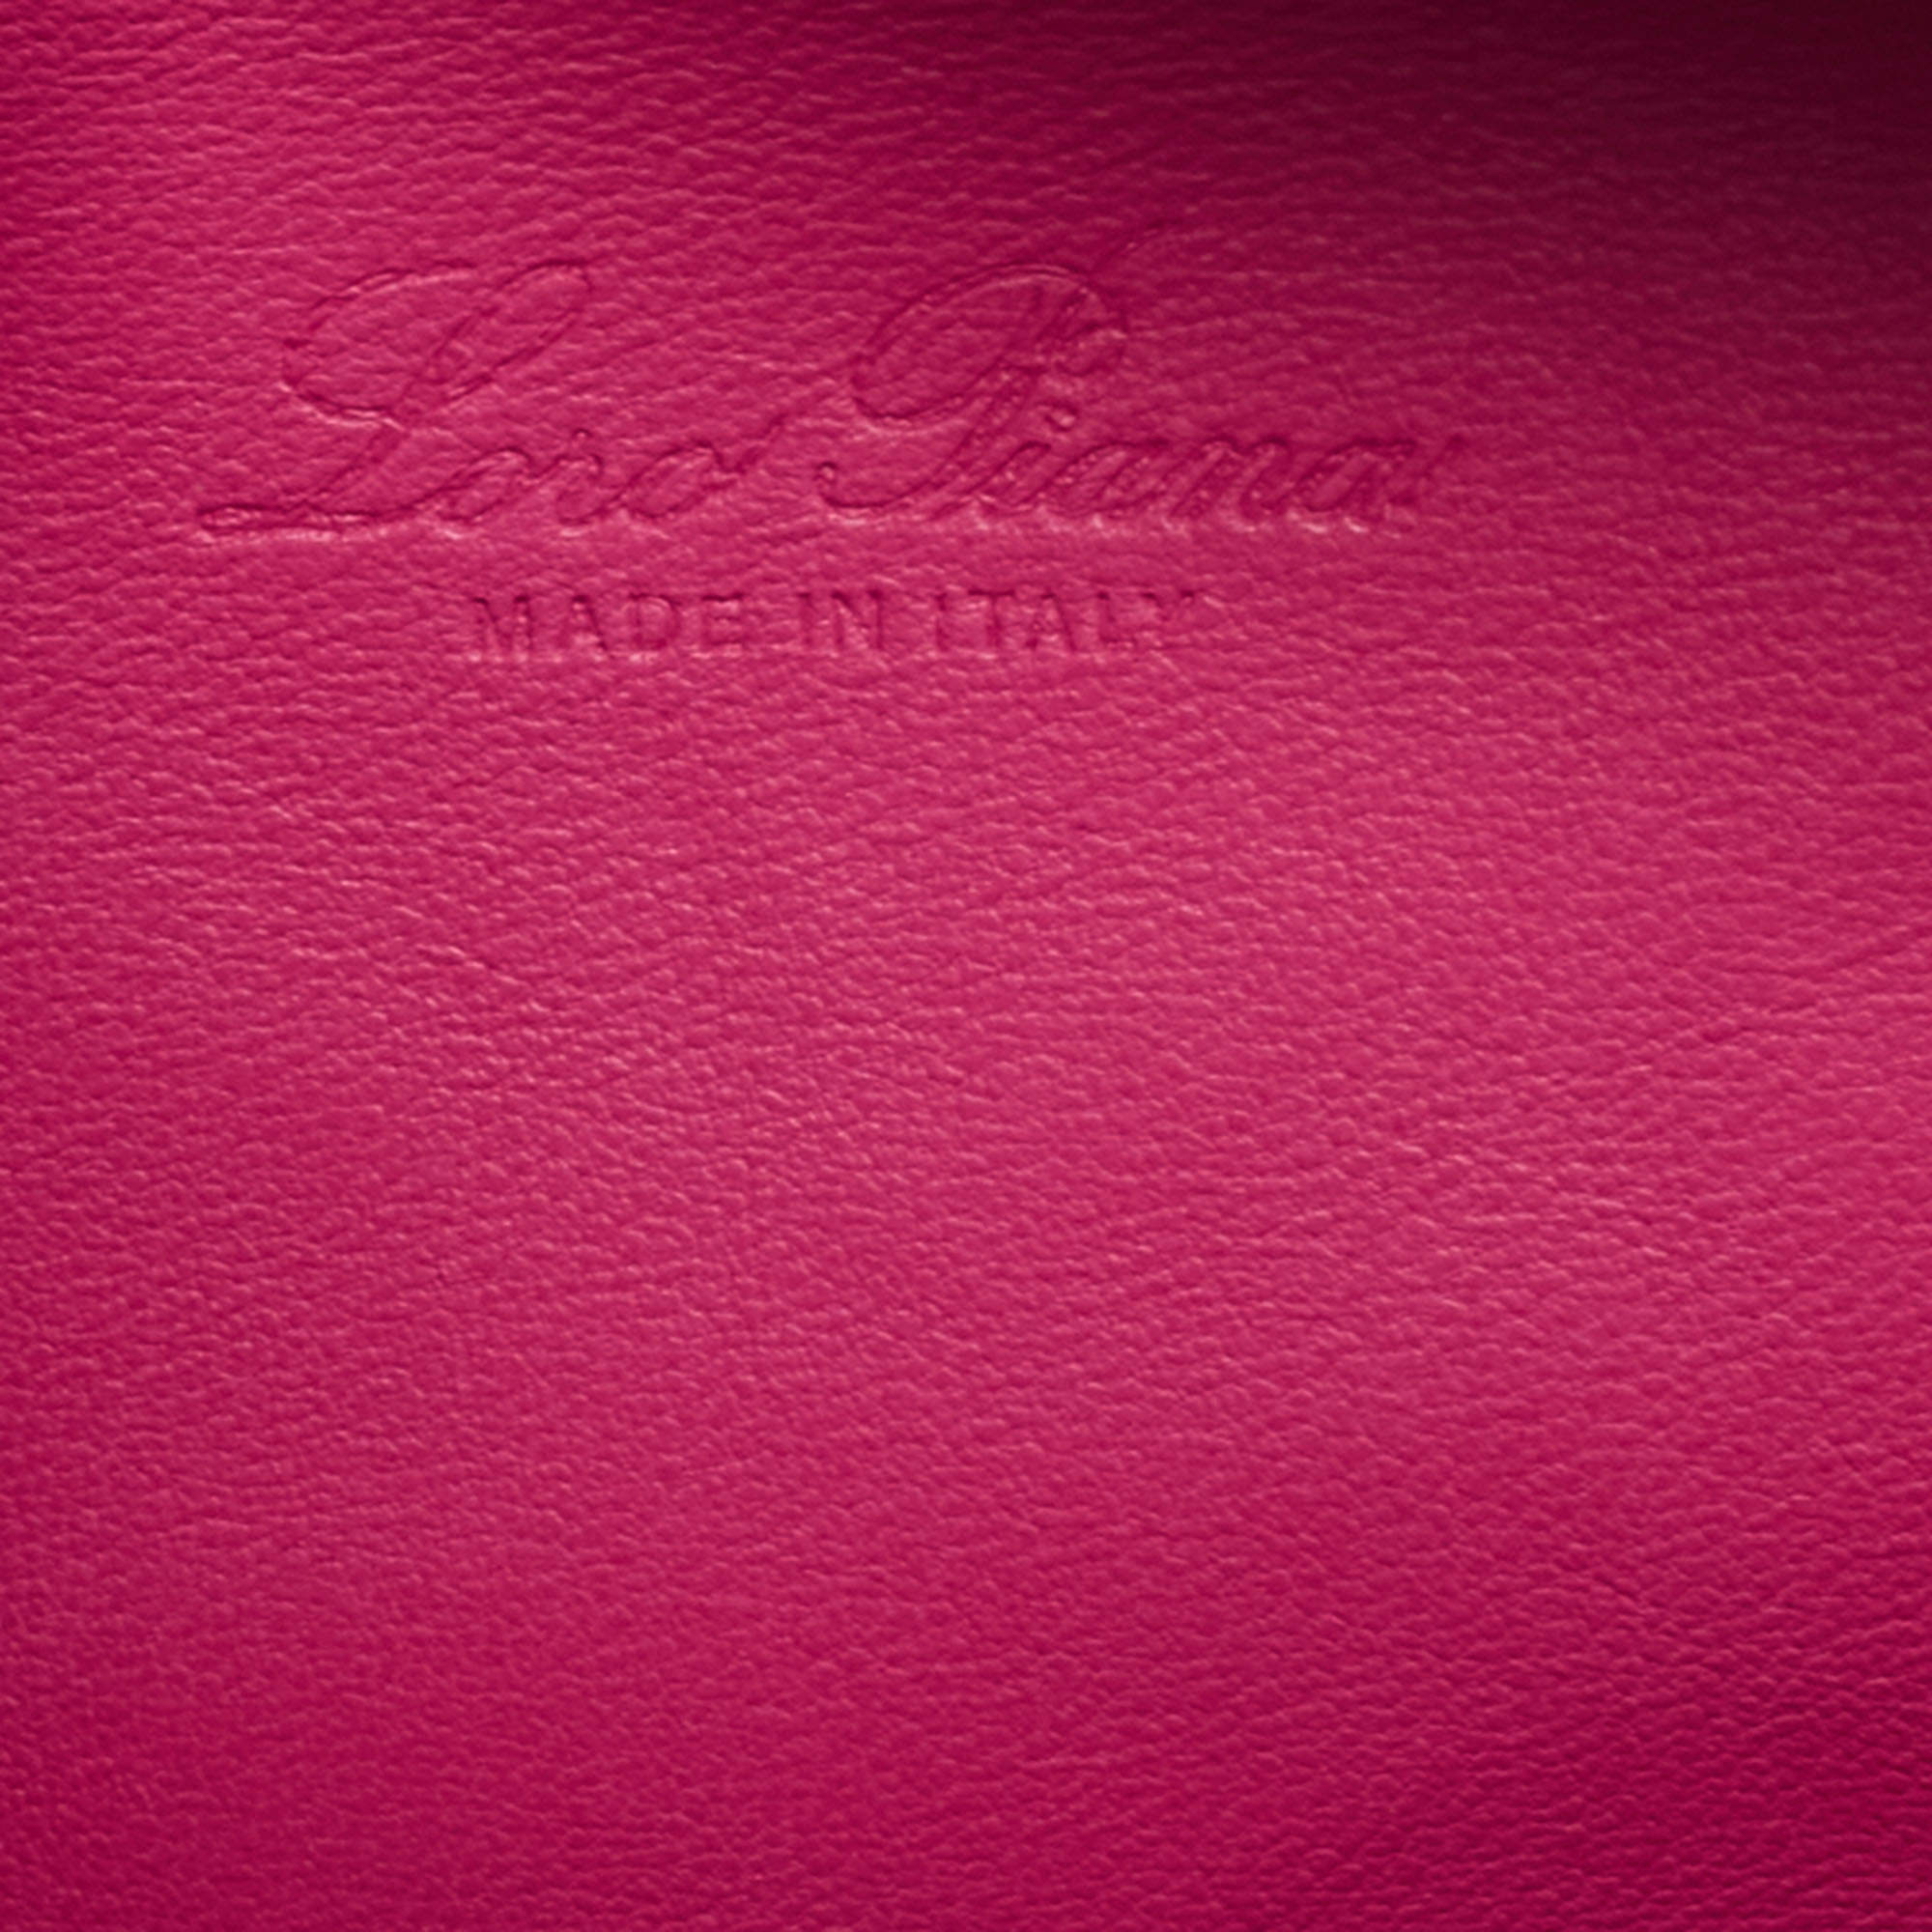 NEW AUTH Loro Piana L19 Hot Pink ostrich leather Pouch with gold hardware